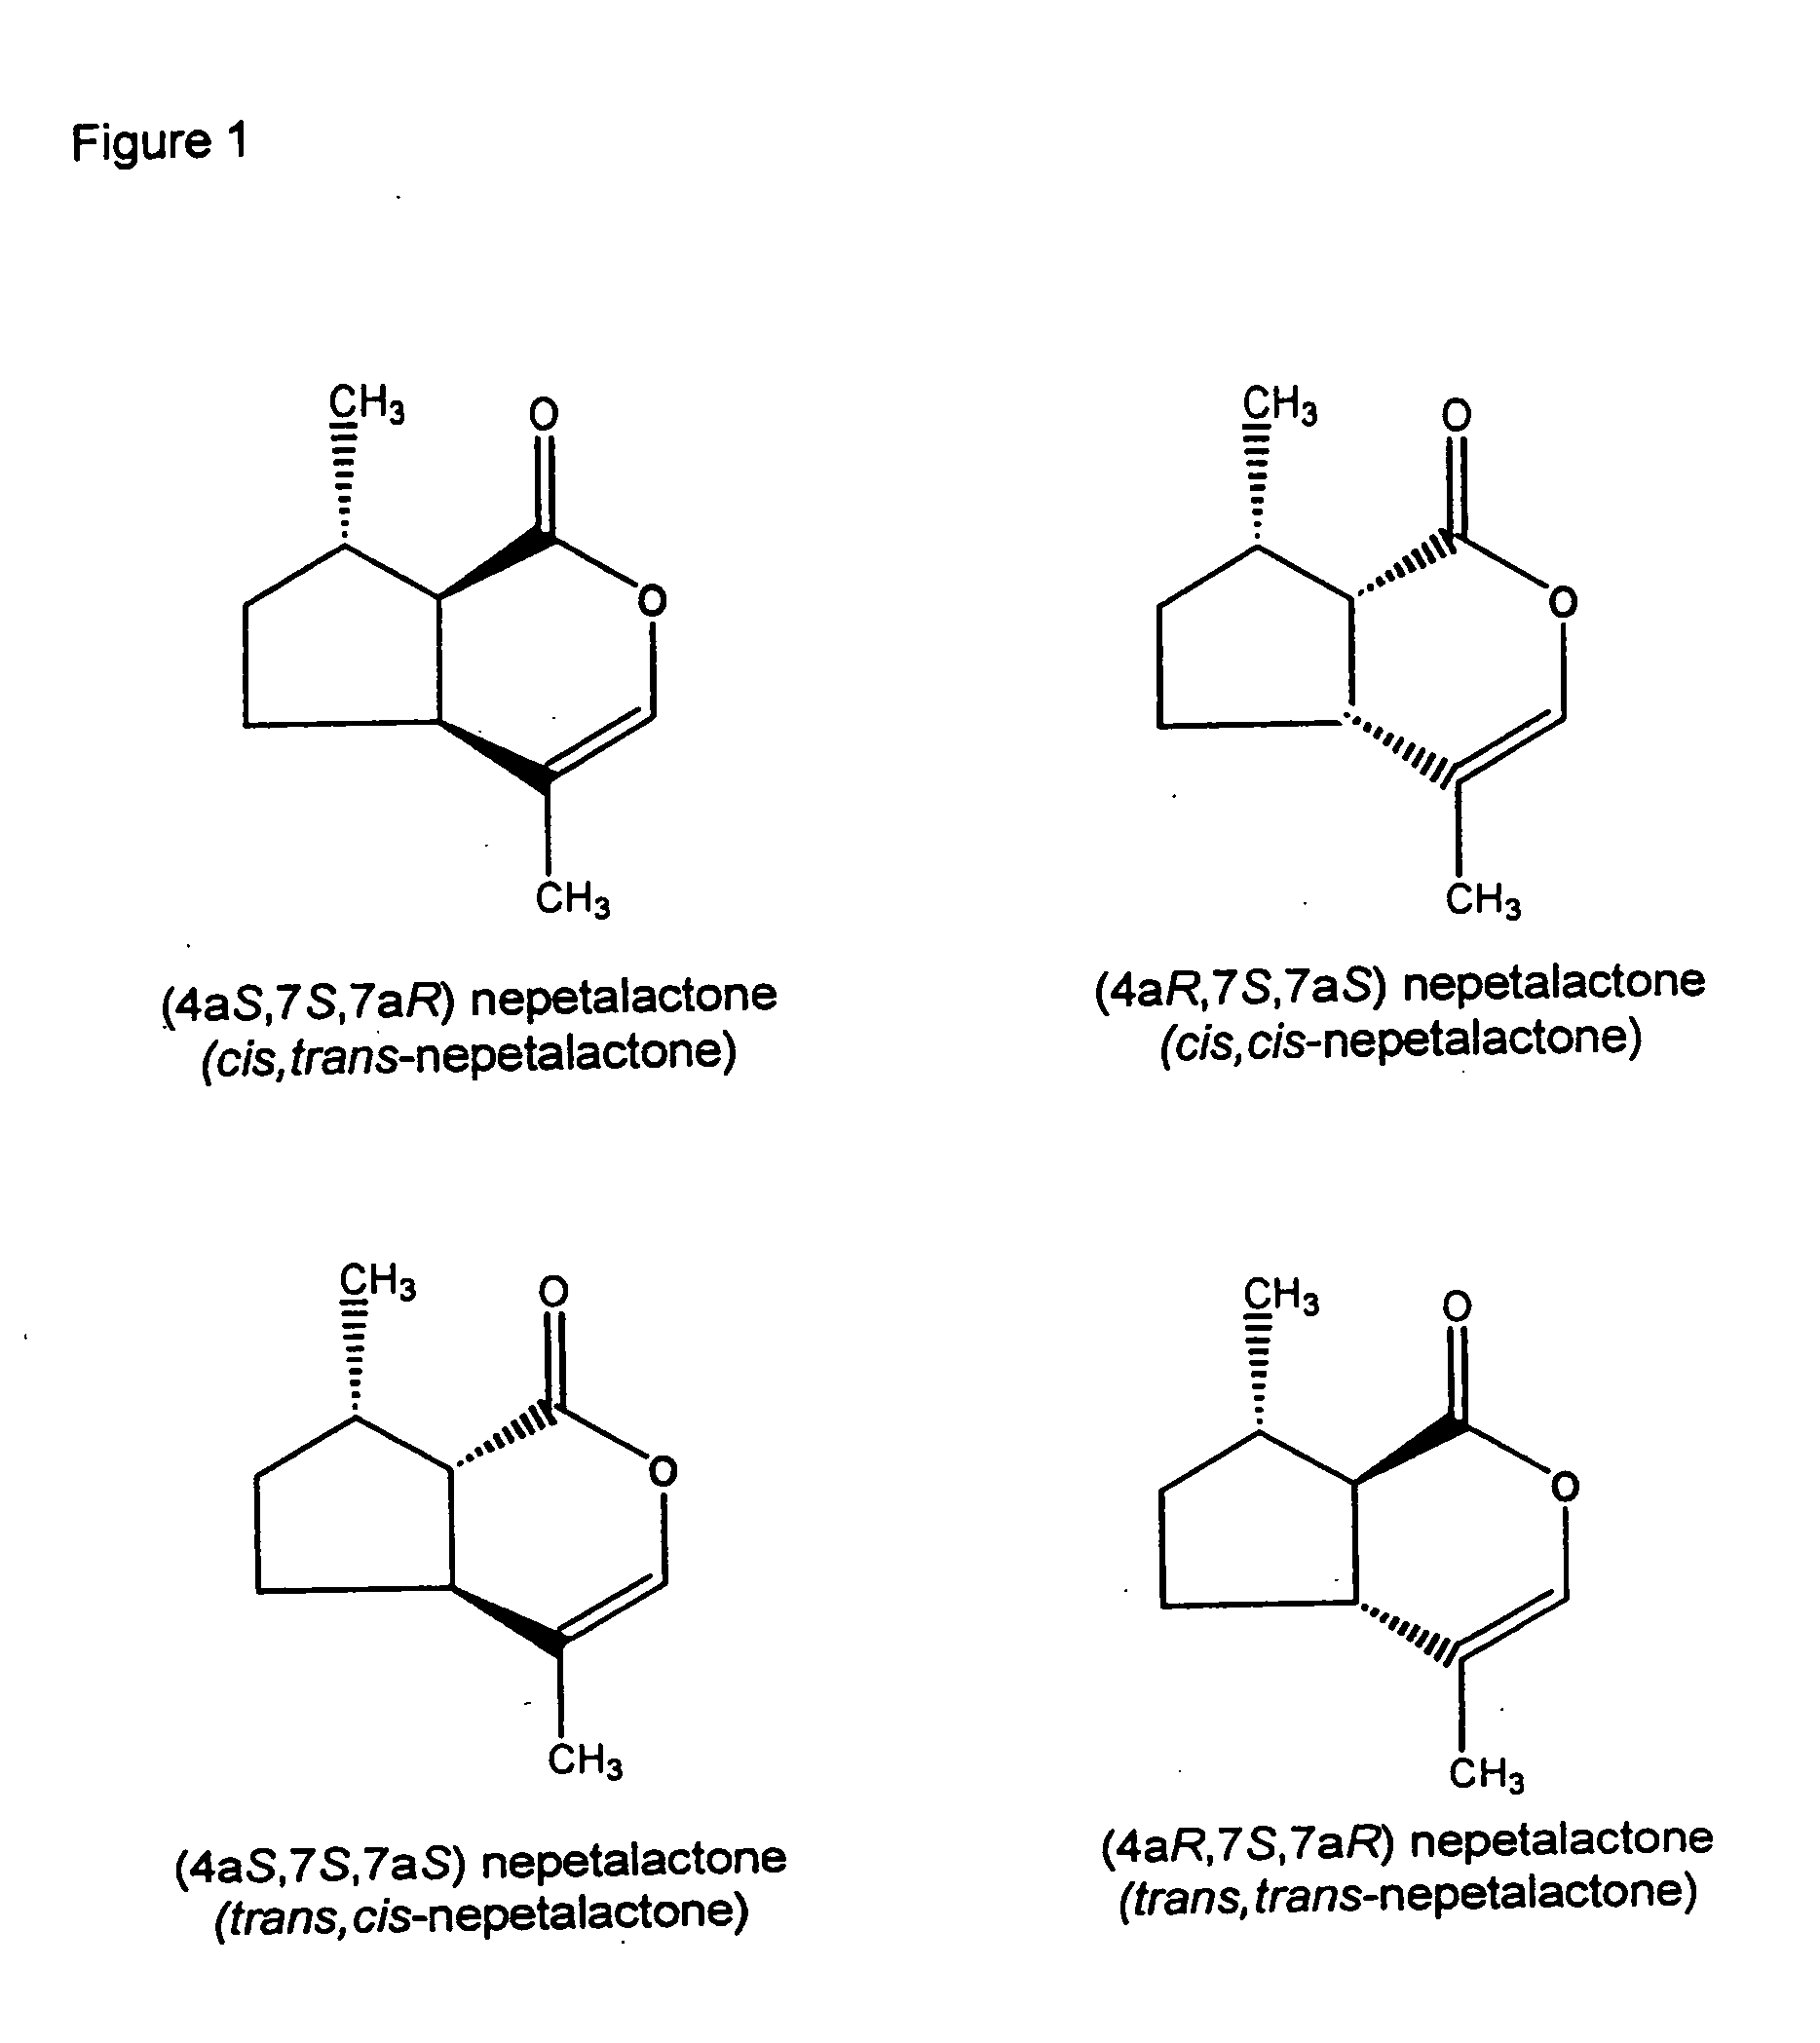 Insect repellent compounds